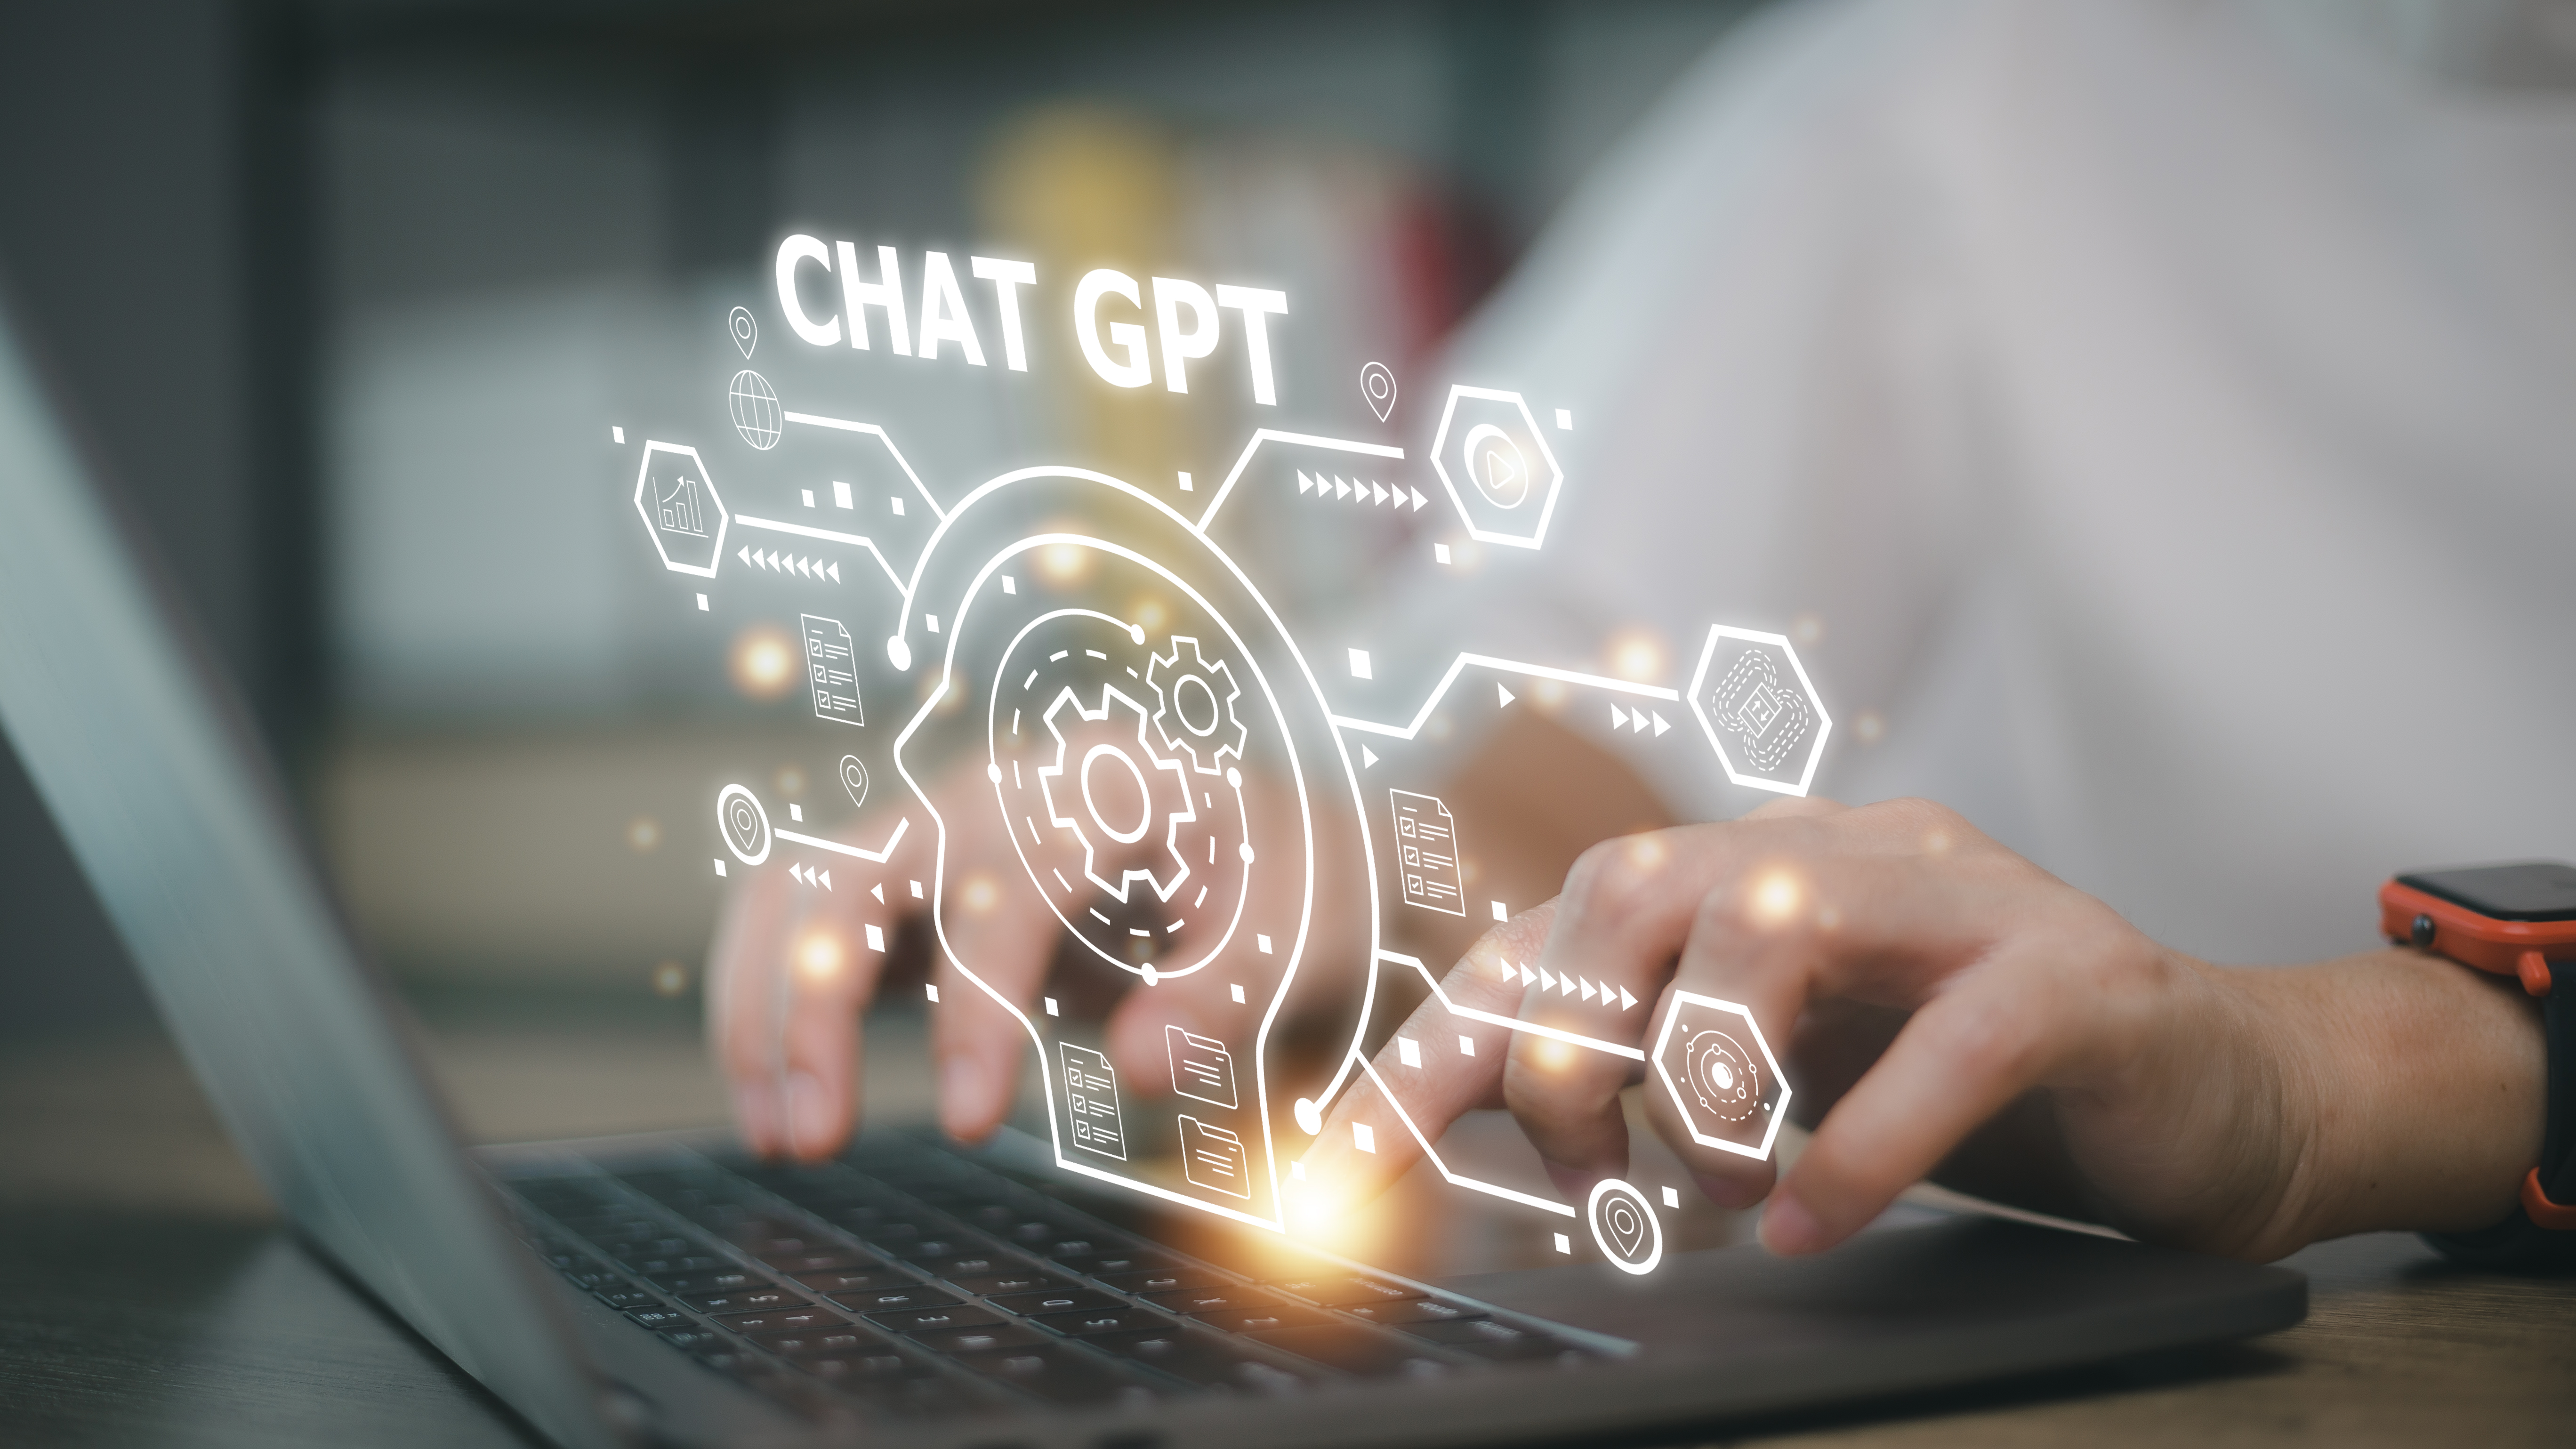 typing on laptop with Chat GPT graphic